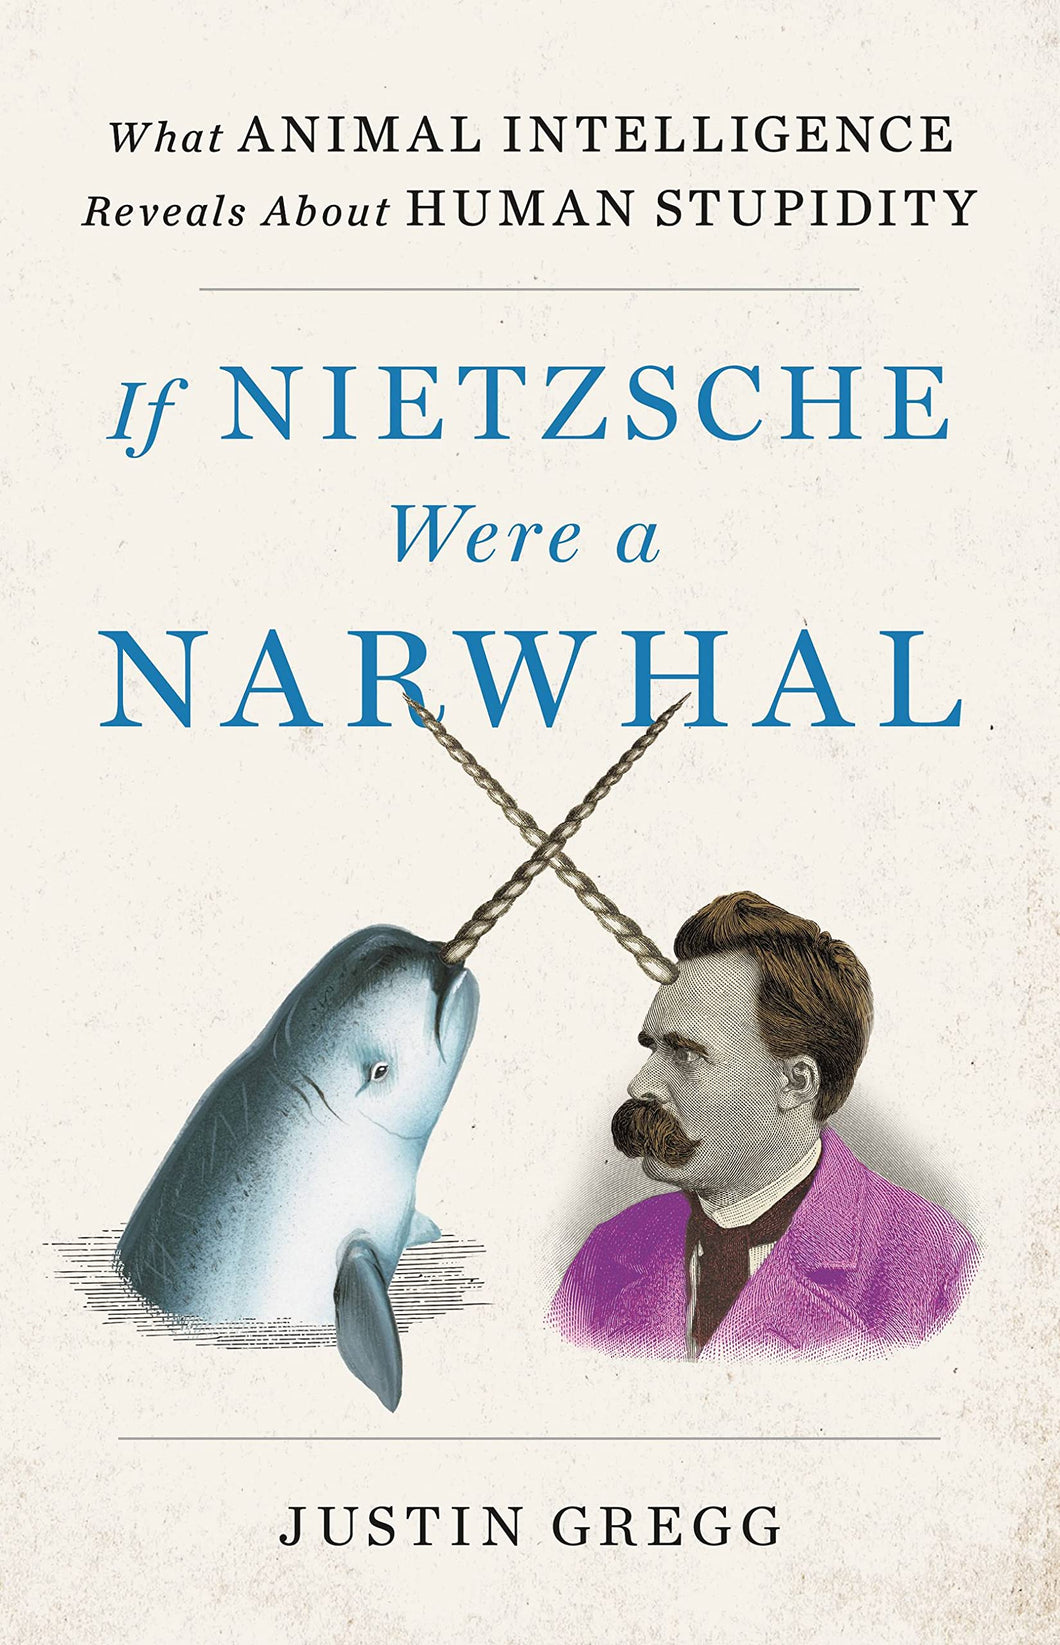 If Nietzsche Were a Narwhal: What Animal Intelligence Reveals About Human Stupidity [Justin Gregg]